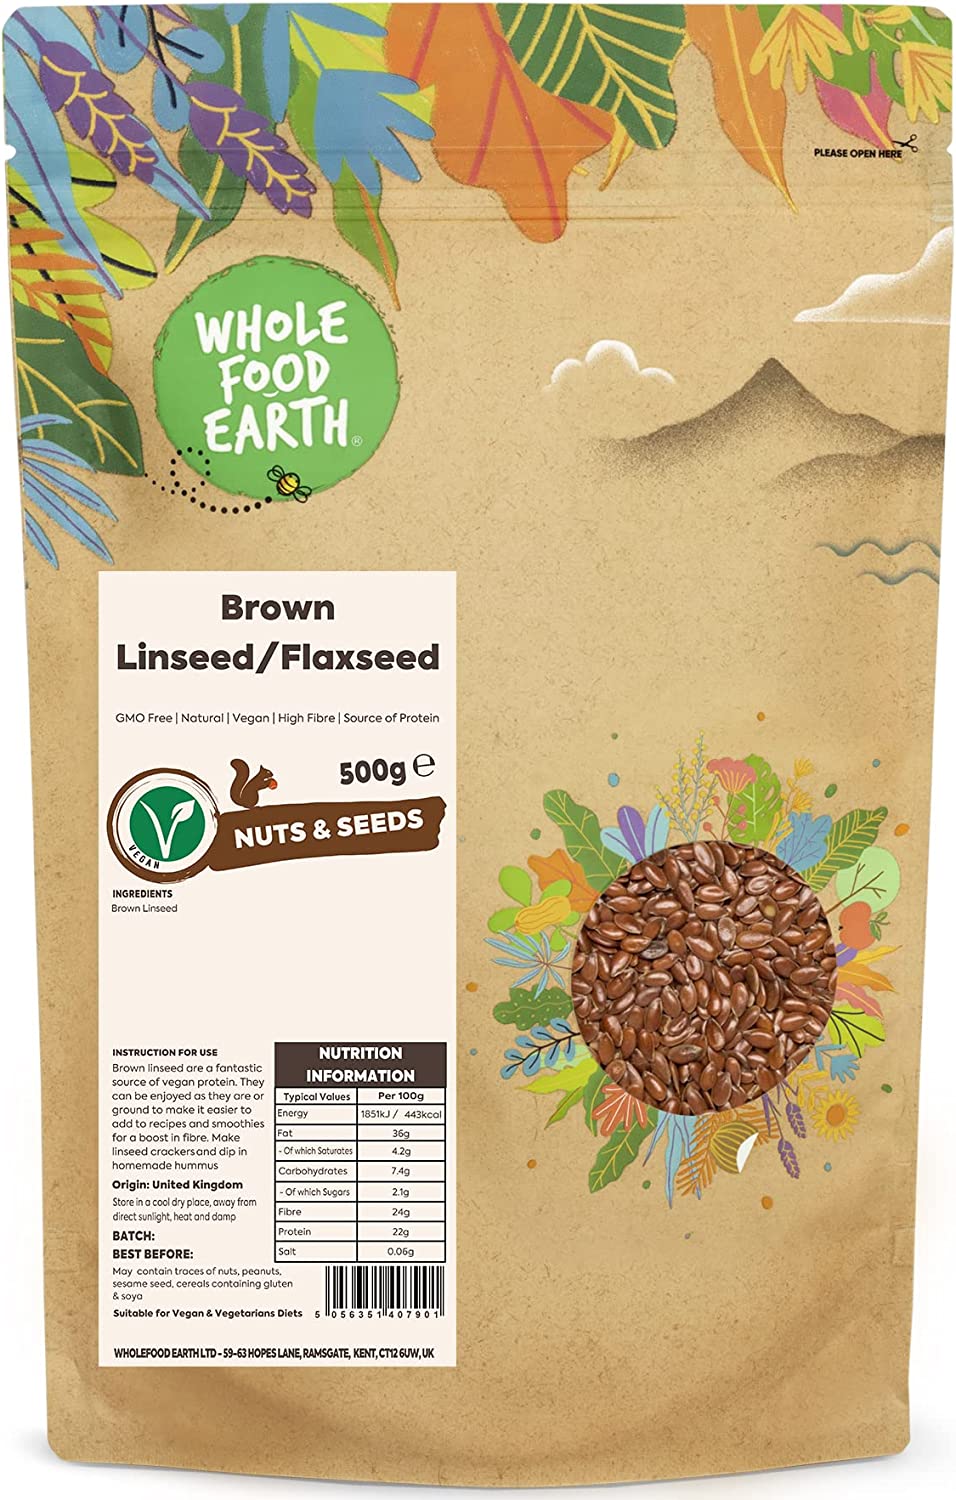 Wholefood Earth Brown Linseed/Flaxseed 500g (Nov 22) RRP 5.94 CLEARANCE XL 3.99